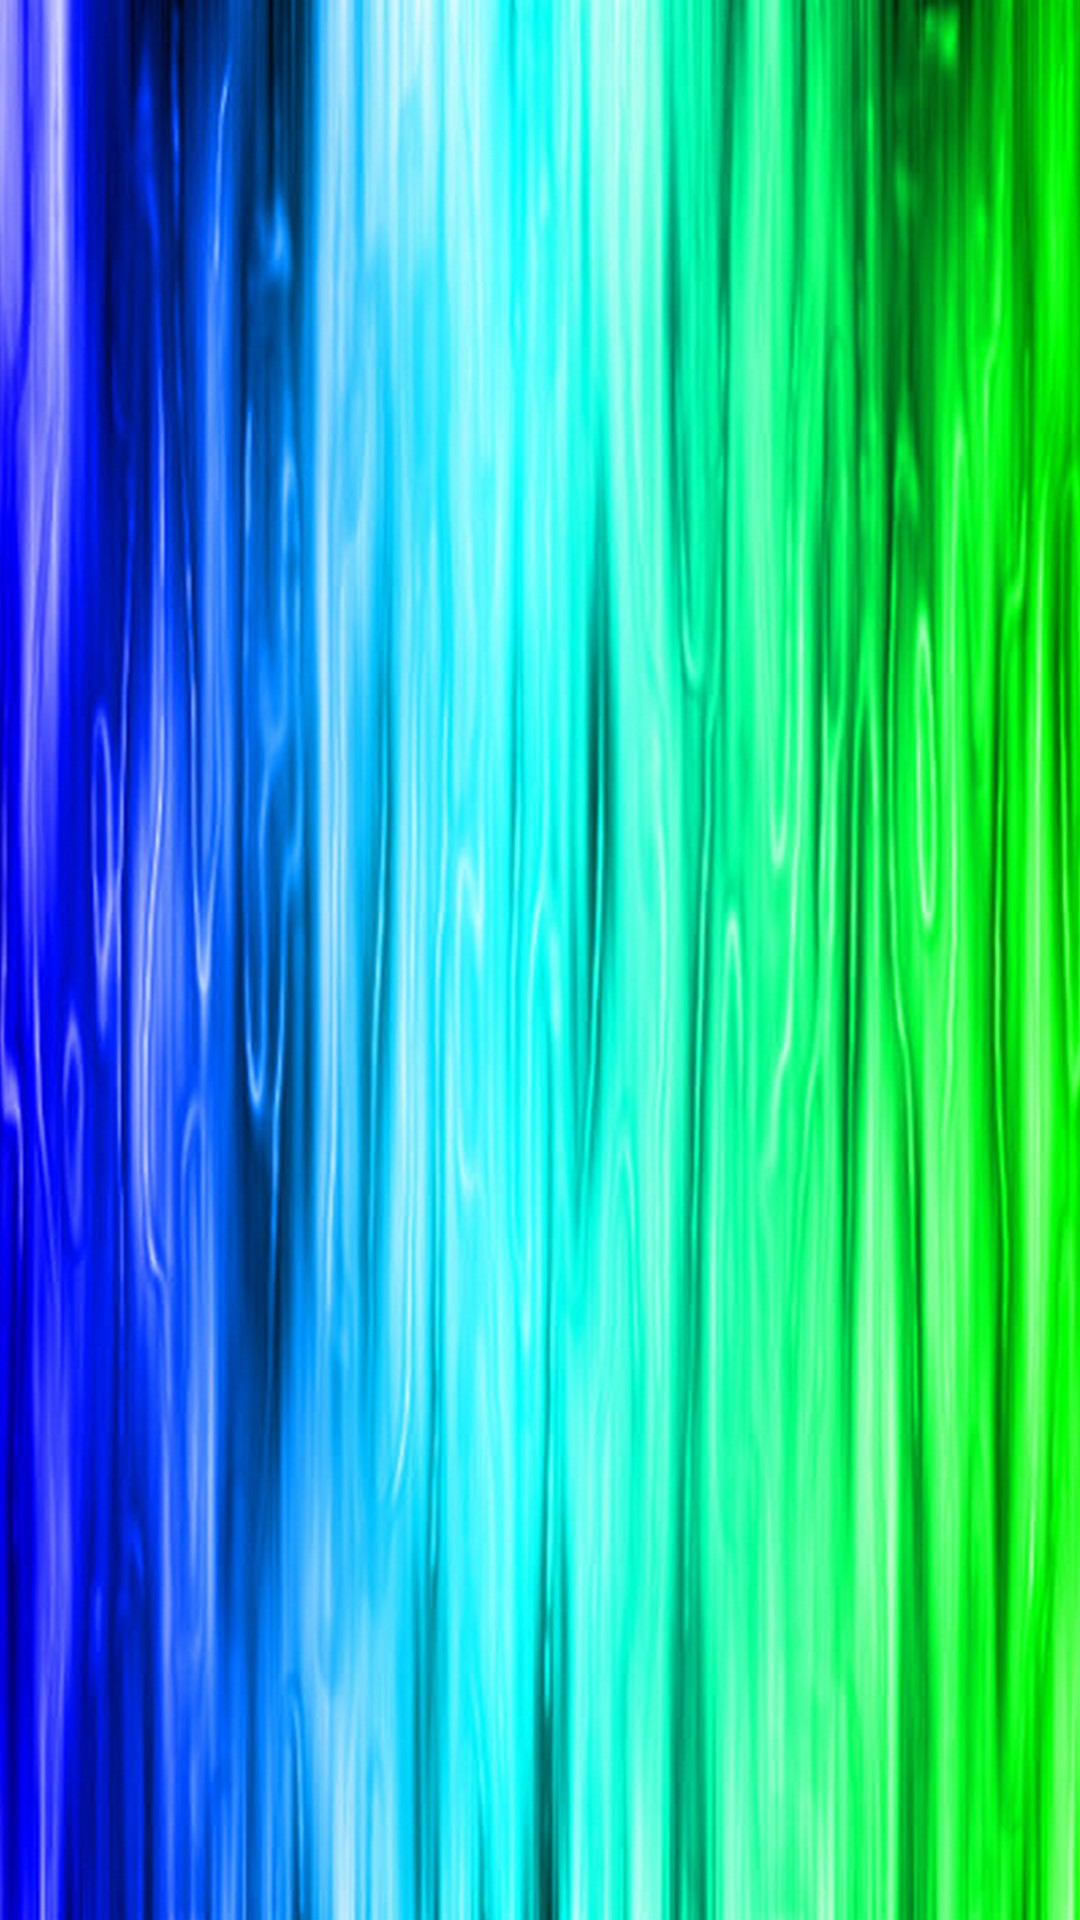 Mobile Wallpapers Rainbow Colors with resolution 1080X1920 pixel. You can make this wallpaper for your iPhone 5, 6, 7, 8, X backgrounds, Mobile Screensaver, or iPad Lock Screen